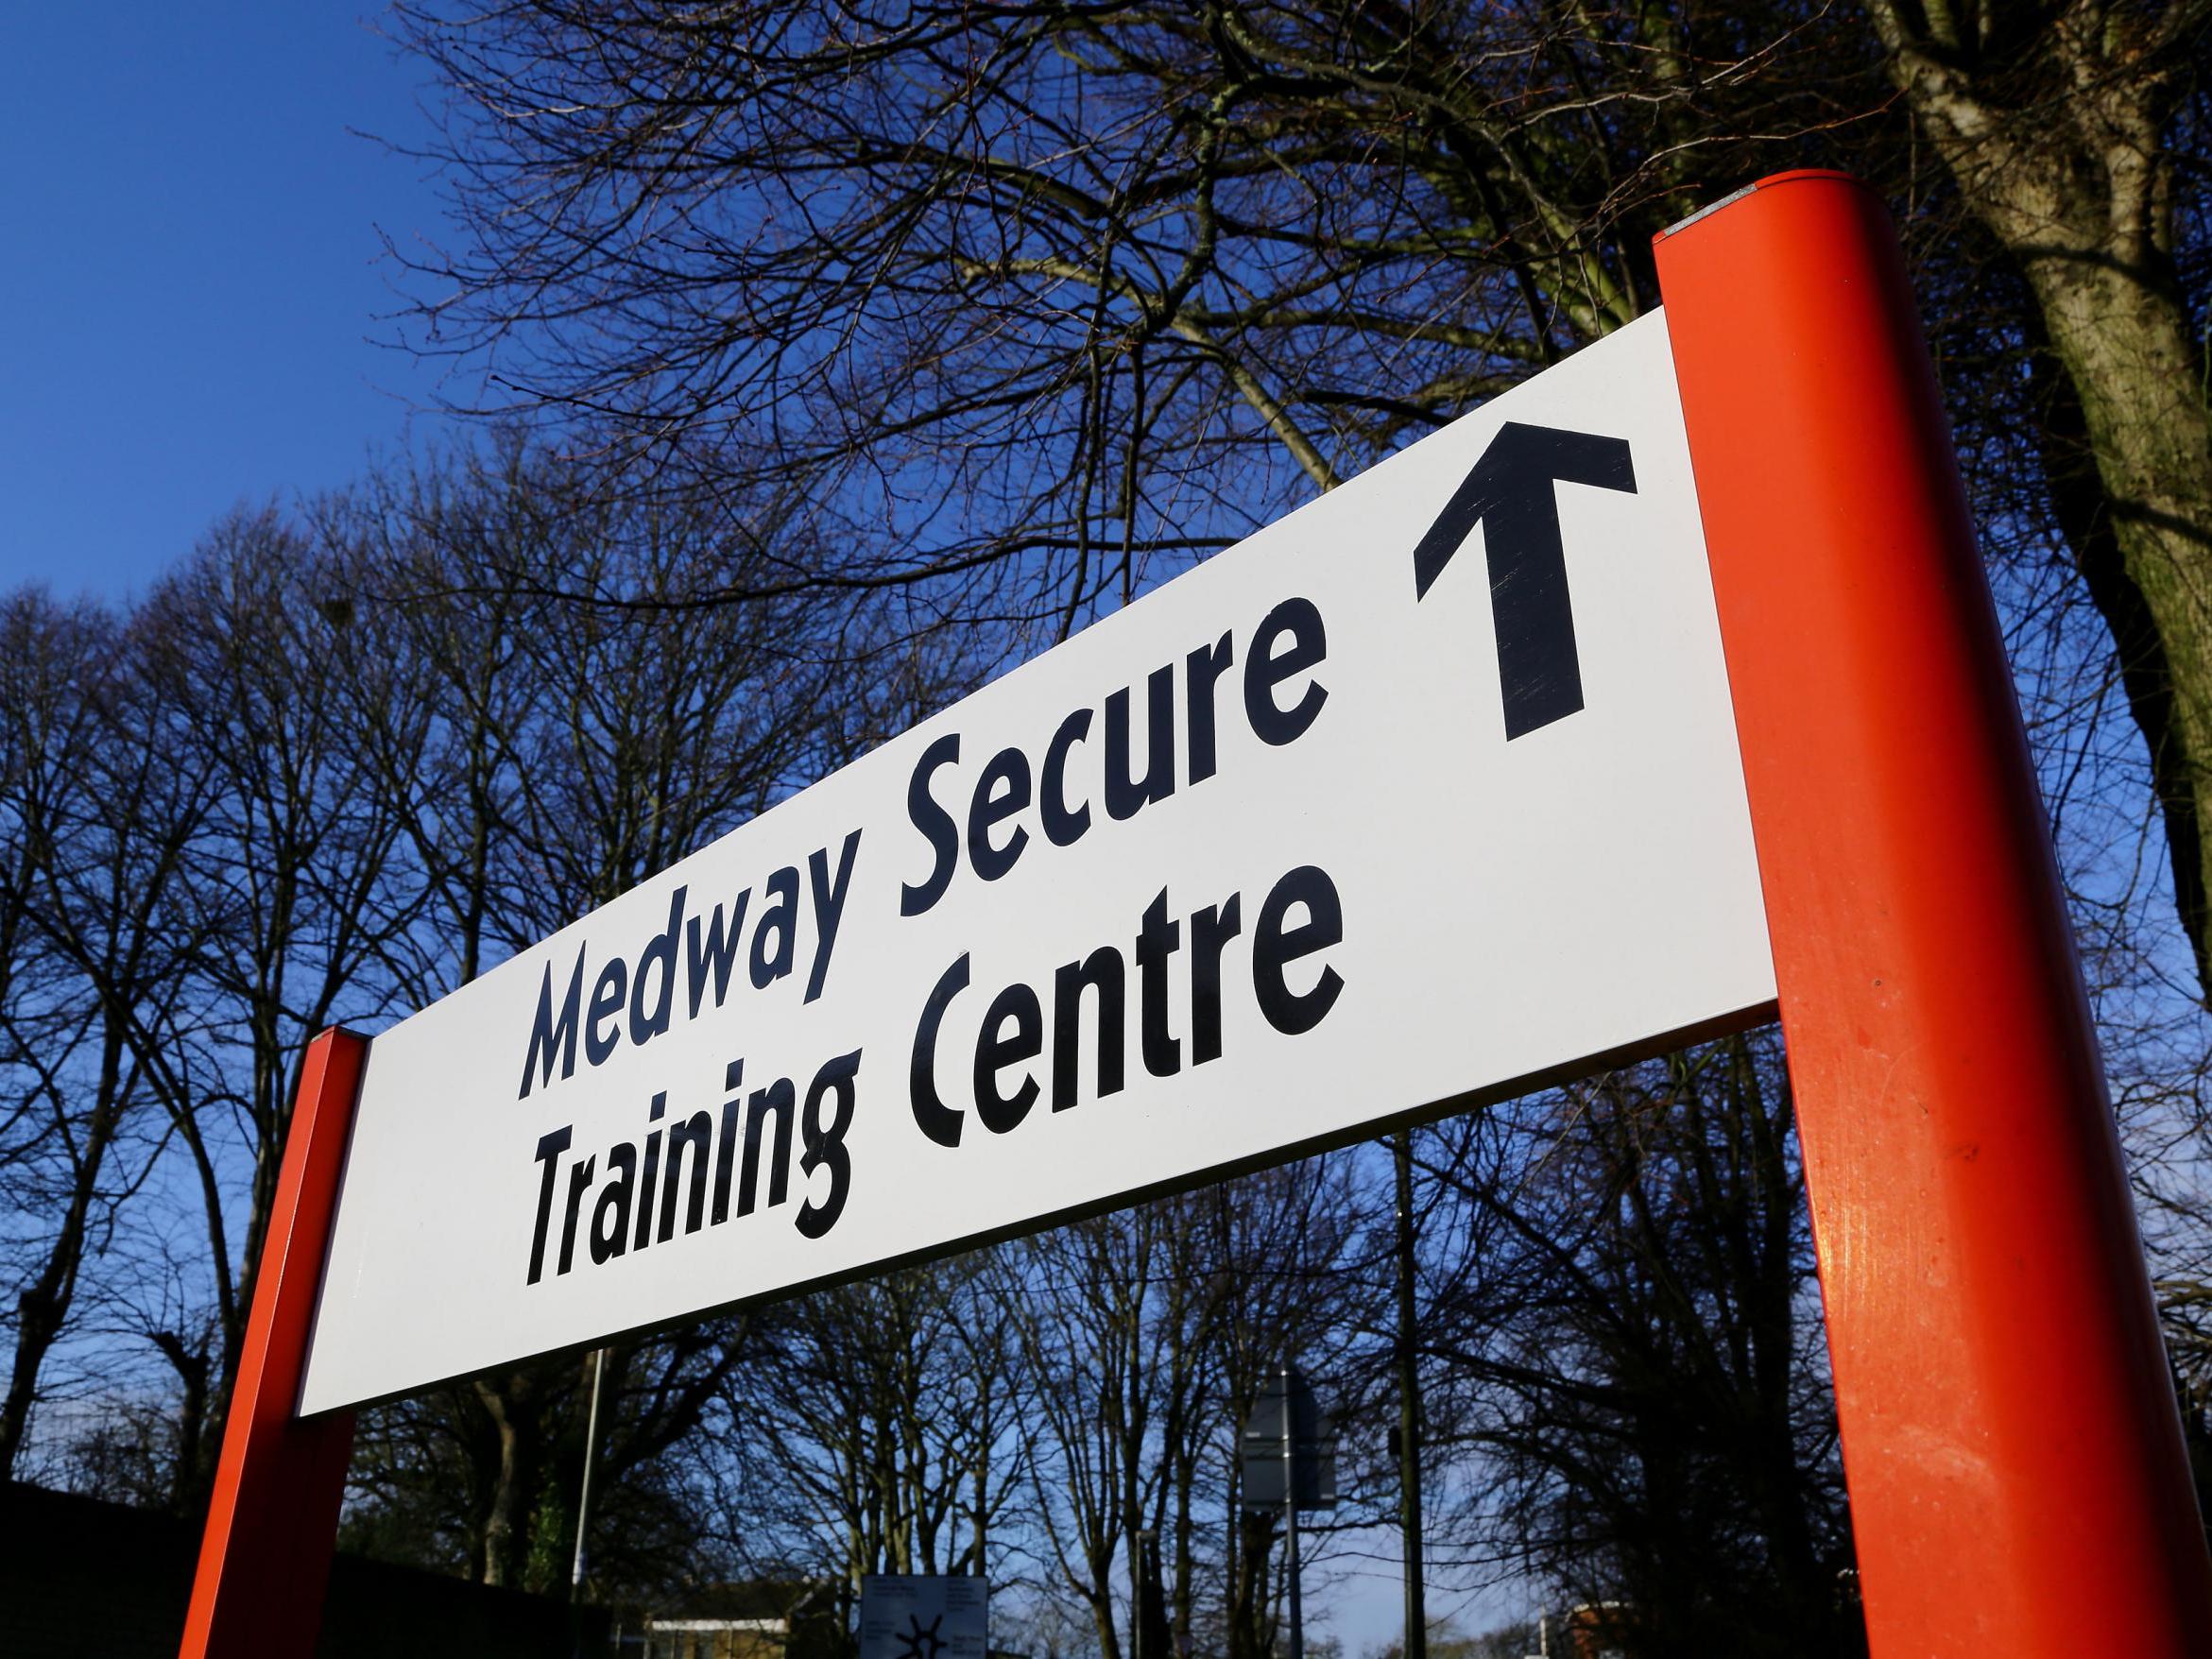 The Oasis Charitable Trust was awarded a contract to manage the Medway secure school this year